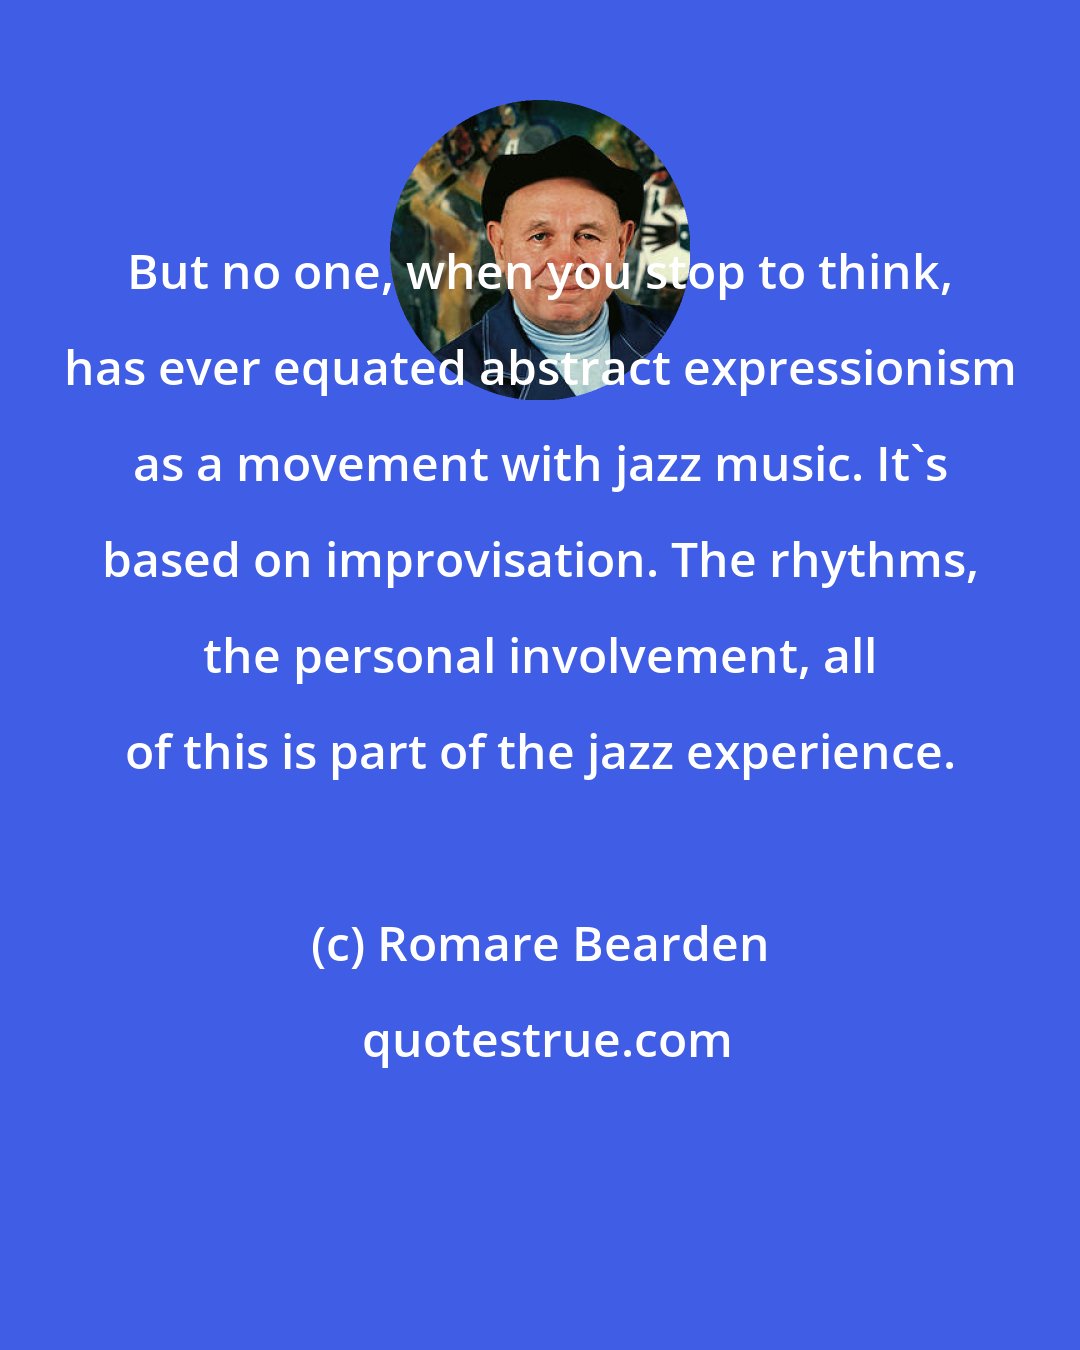 Romare Bearden: But no one, when you stop to think, has ever equated abstract expressionism as a movement with jazz music. It's based on improvisation. The rhythms, the personal involvement, all of this is part of the jazz experience.